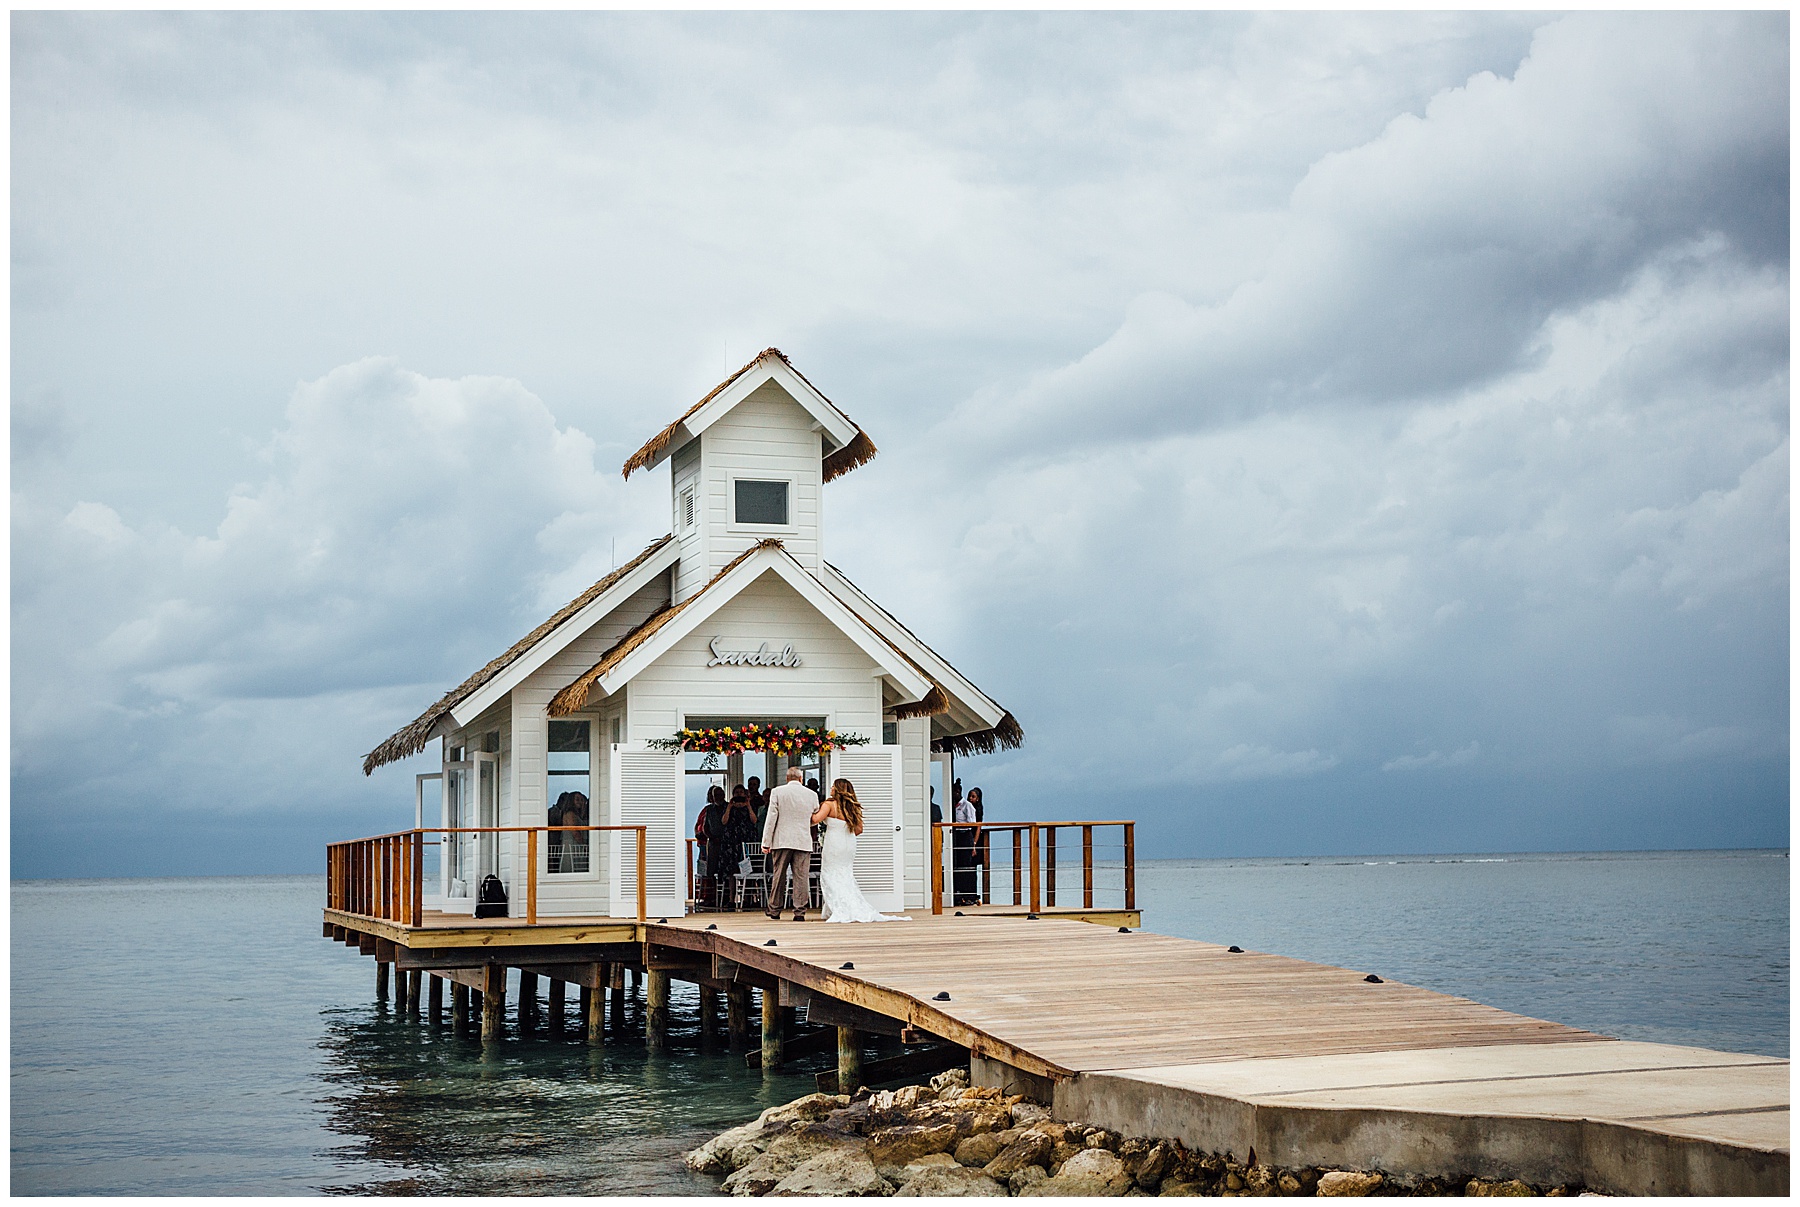 Sandals south coast ceremony house in Jamaica